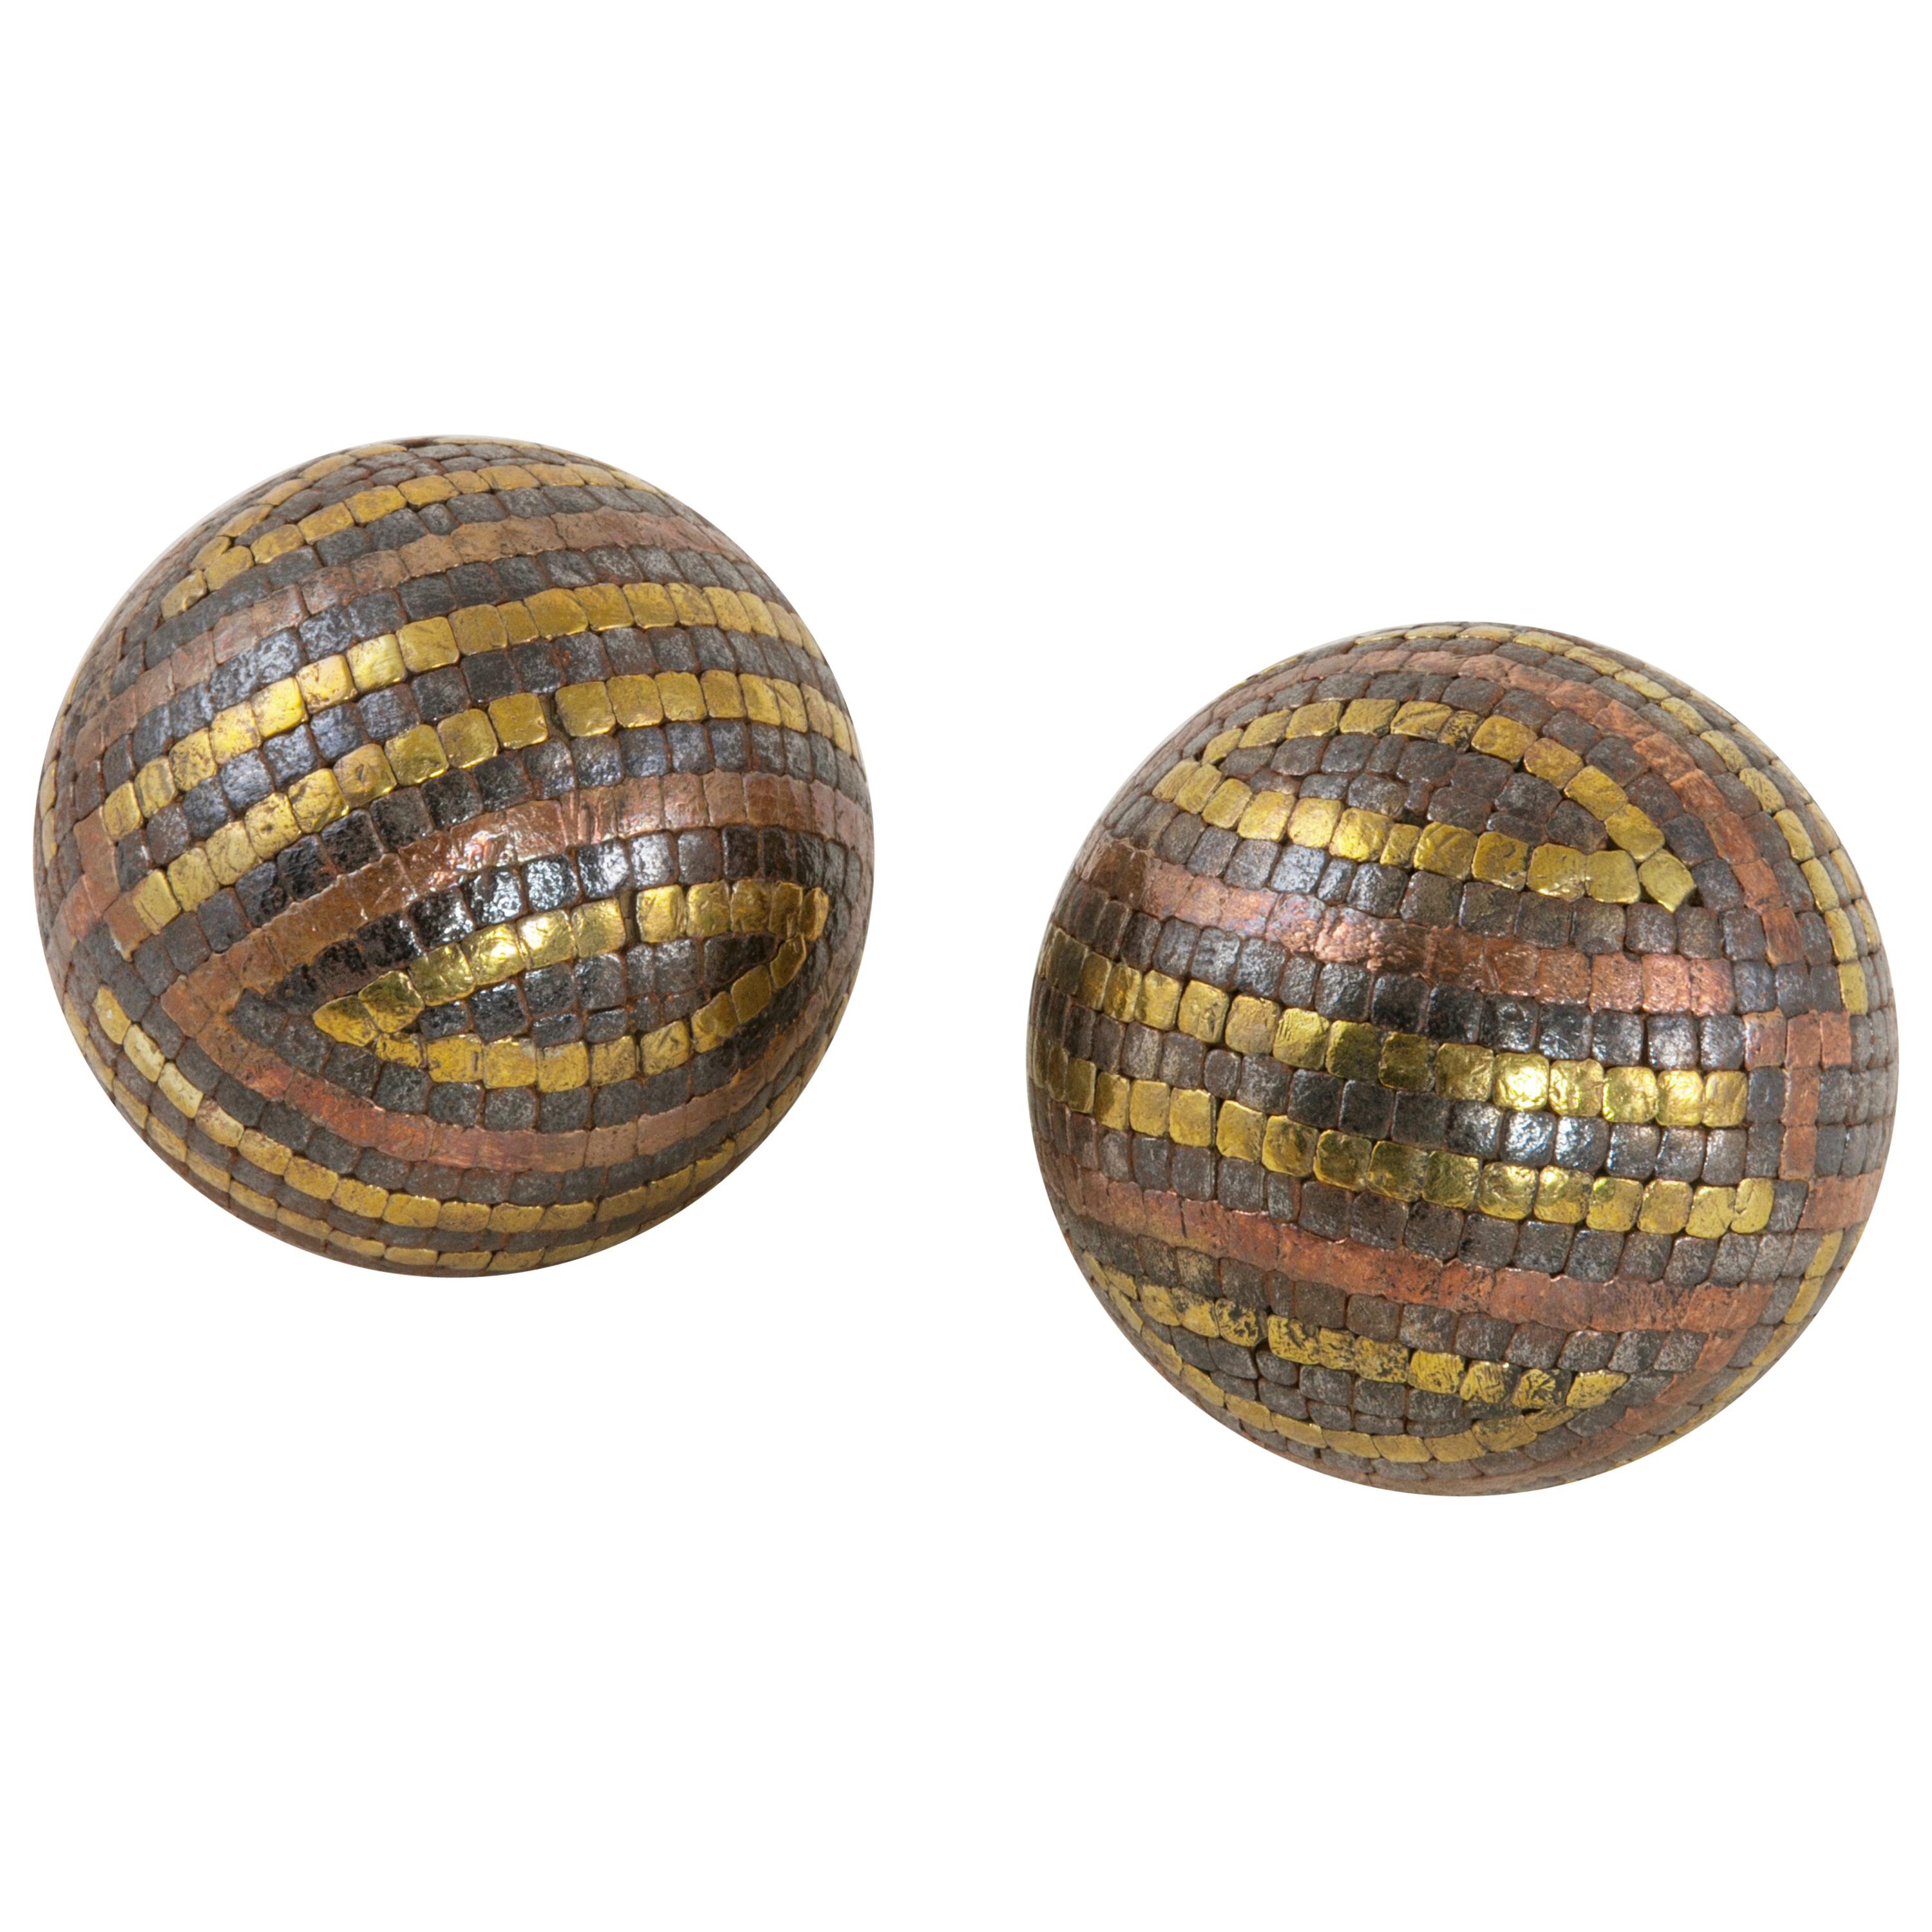 Early 20th Century French Petanque Lawn Balls with Iron, Copper and Brass Nails